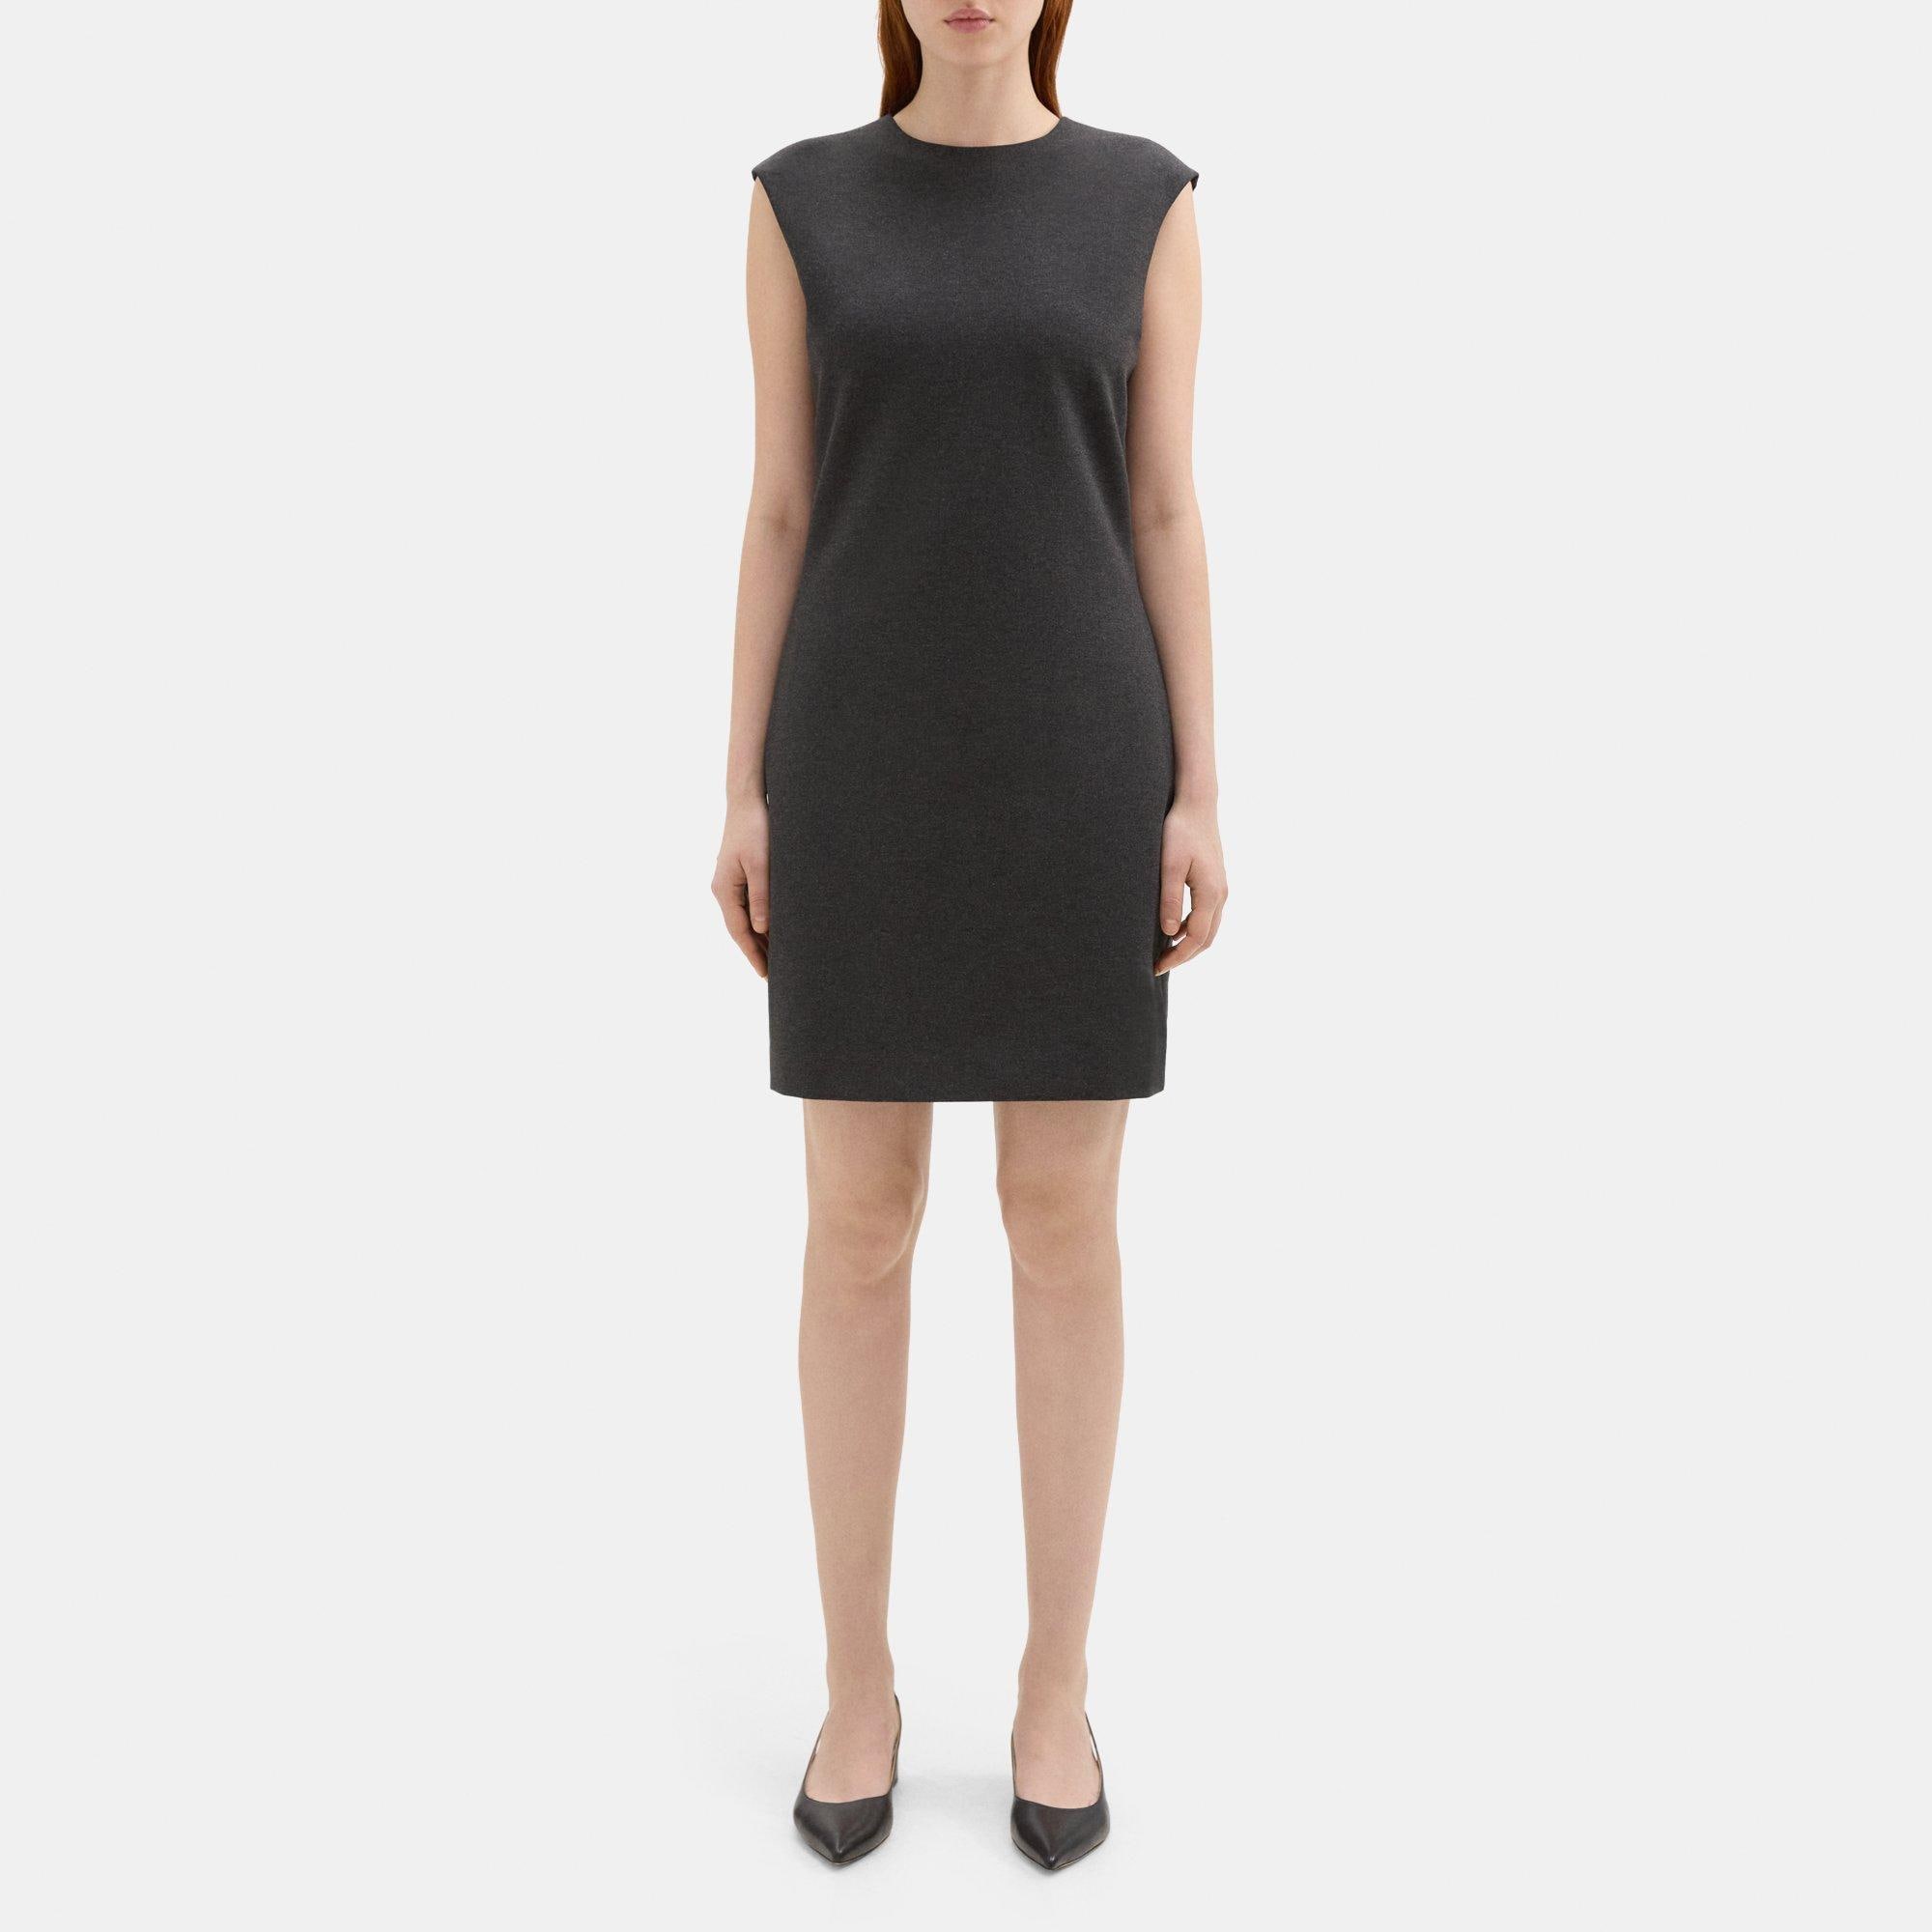 Theory Cap-Sleeve Shift Dress in Heathered Knit Ponte